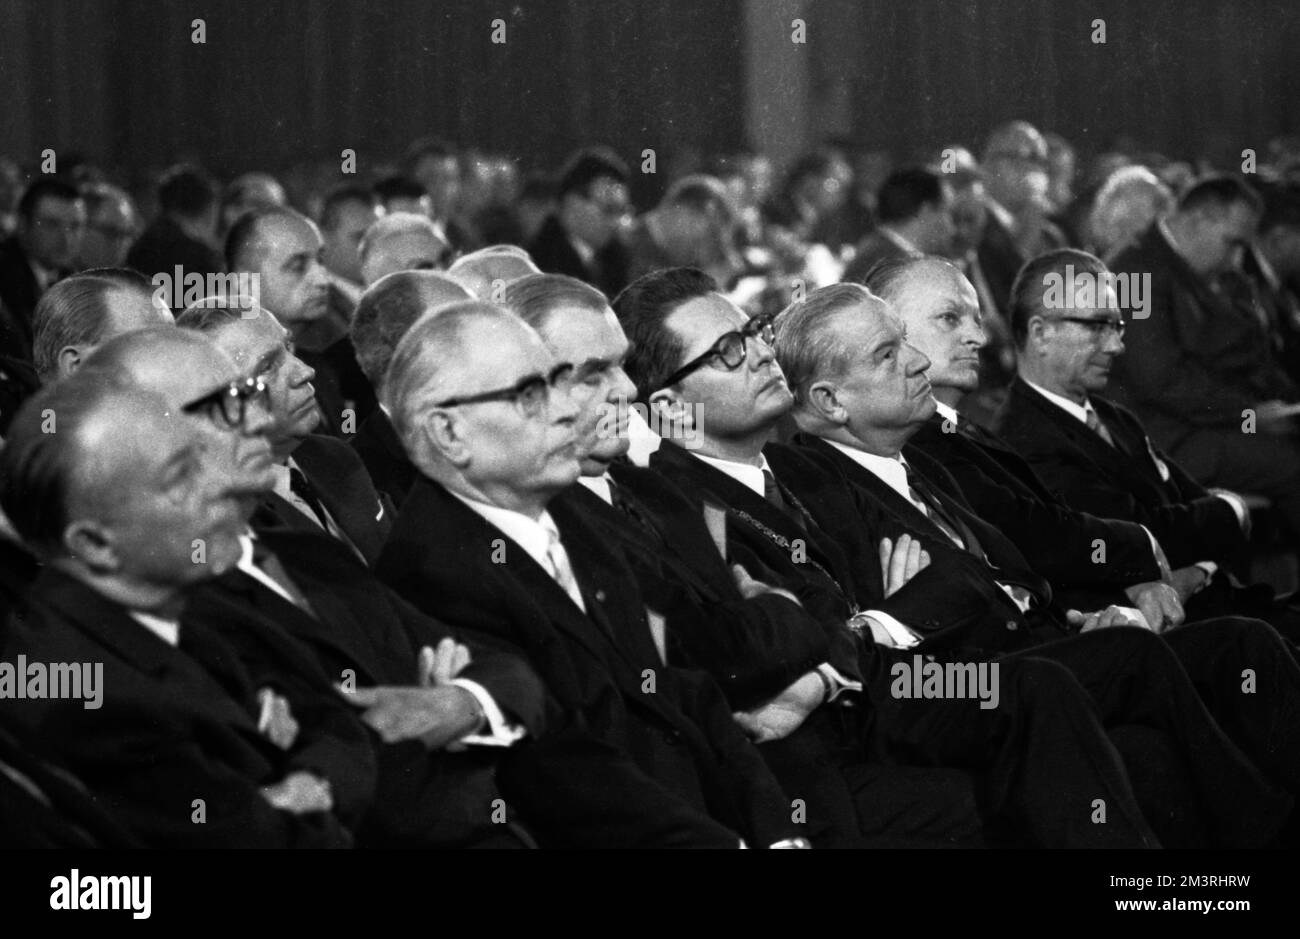 The Central Conference of the Metalworkers' Union (IGM) on 5. 9. 1968 in Munich on Security and Progress. Otto Brenner, Adolf Schmidt, N. N. Jochen Stock Photo